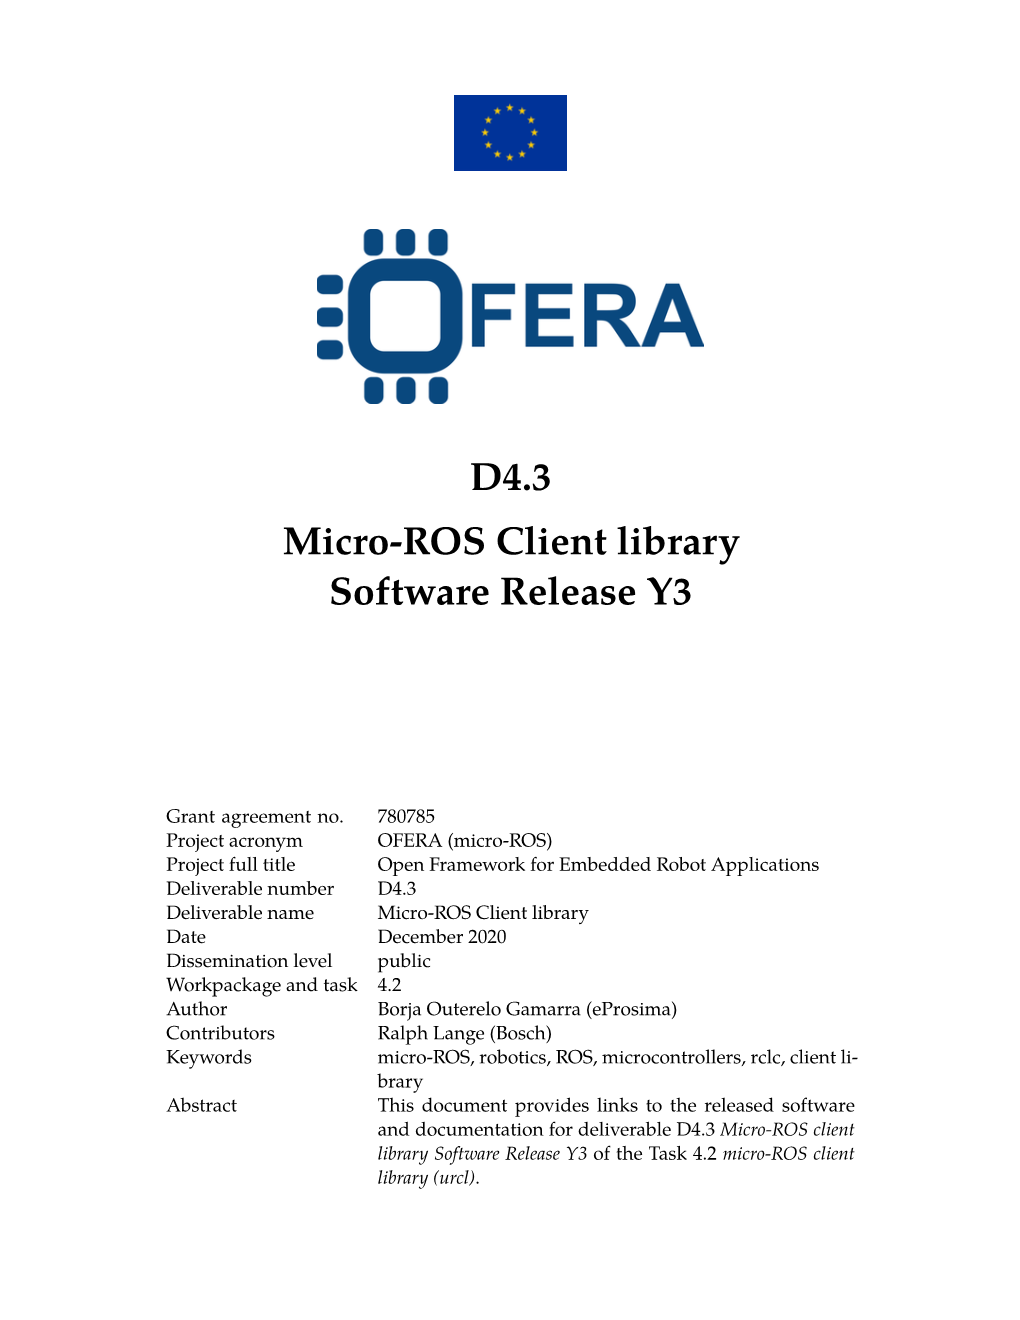 D4.3 Micro-ROS Client Library Software Release Y3